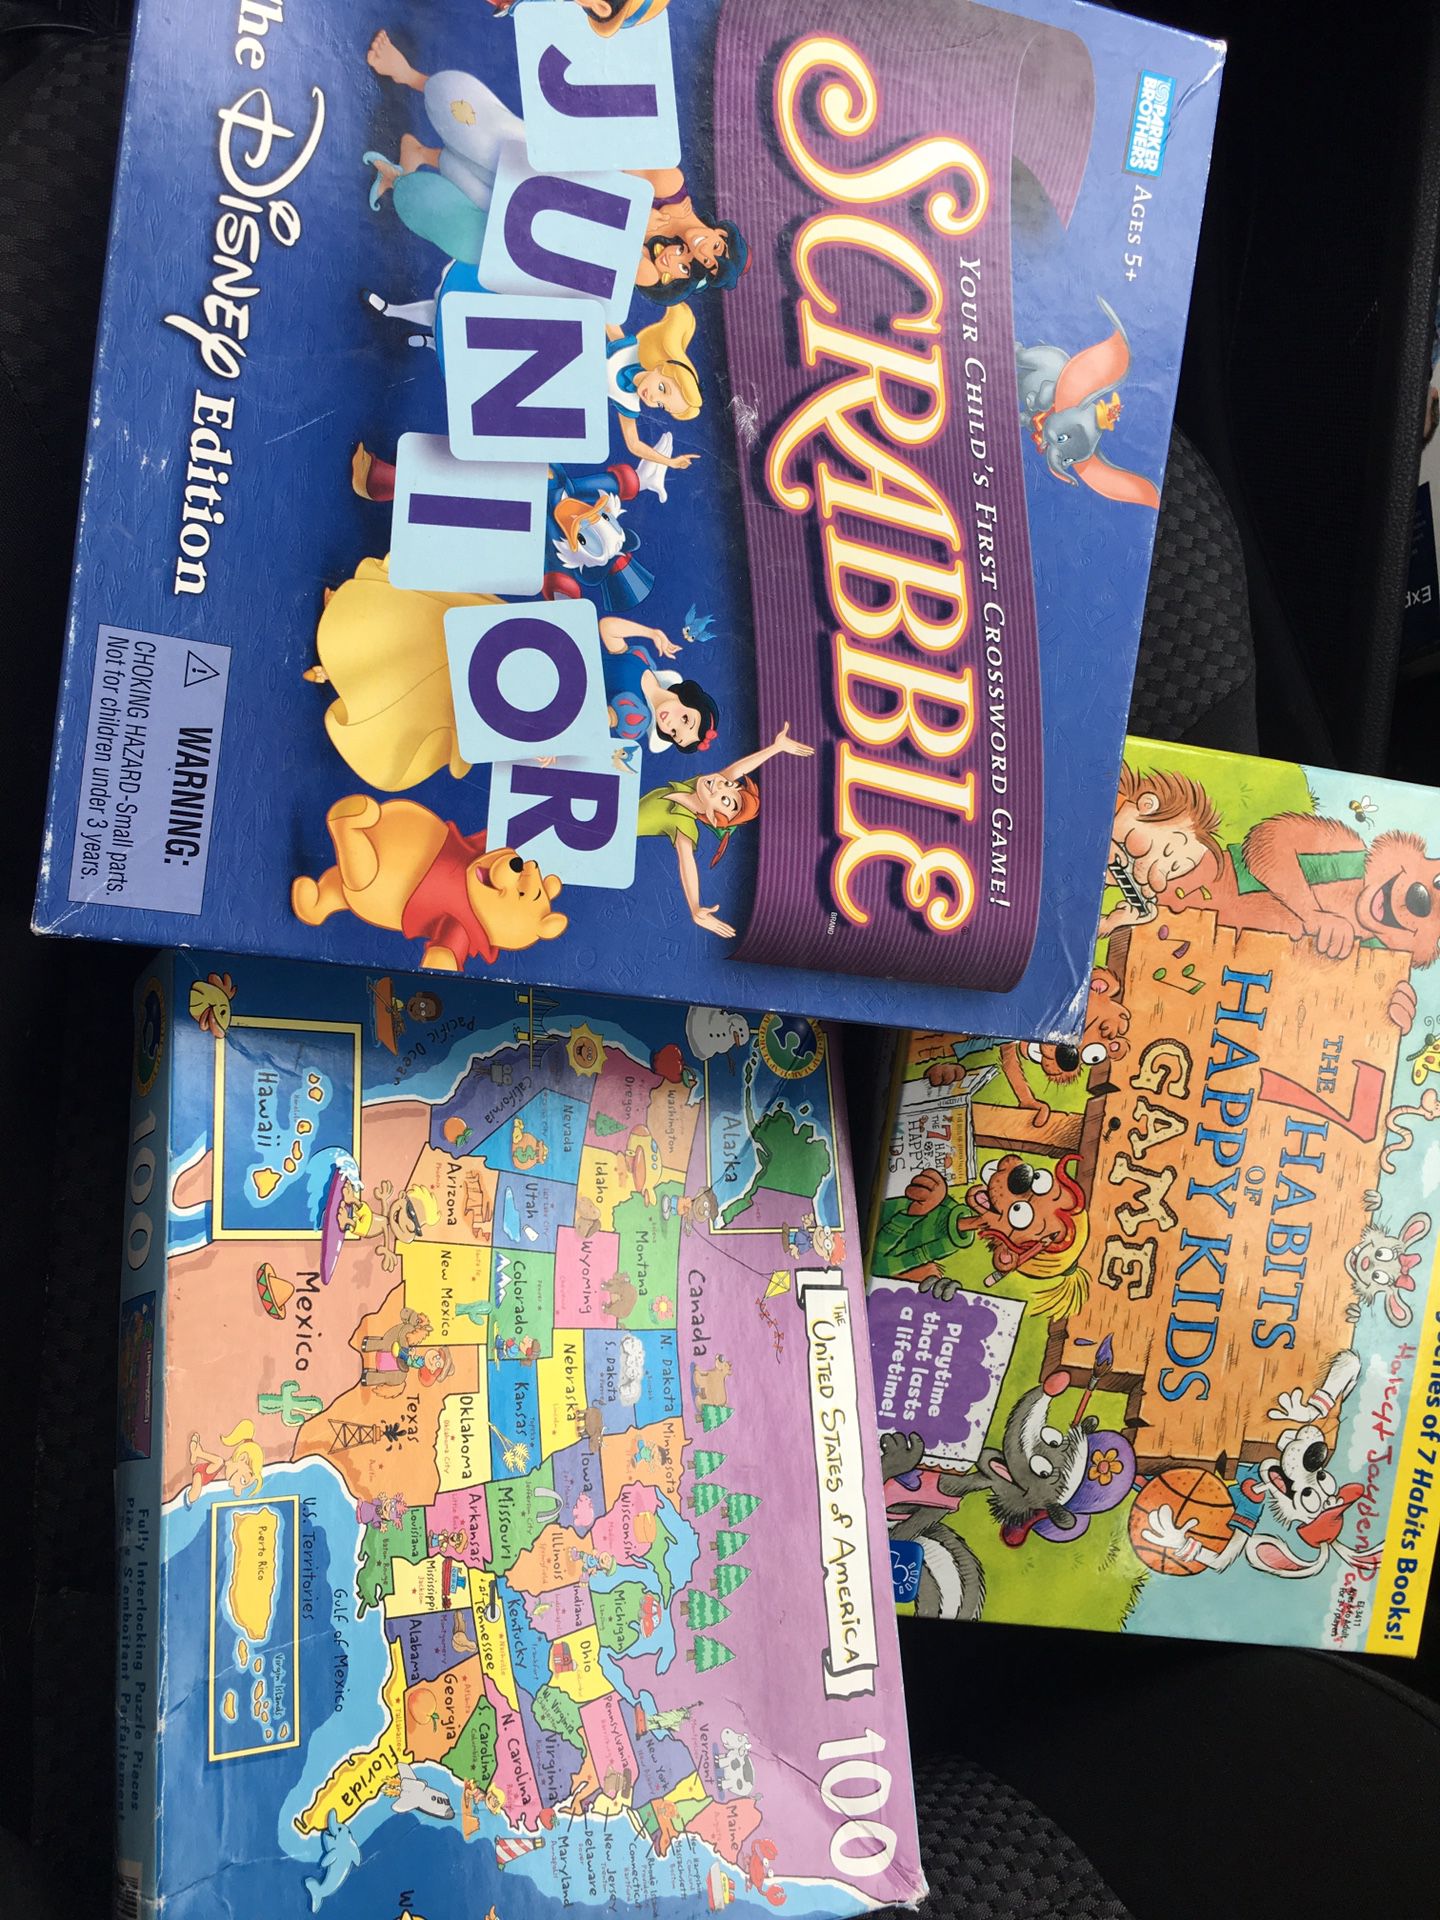 3 games. Scrabble 7 Habits of Happy kids and USMap puzzle